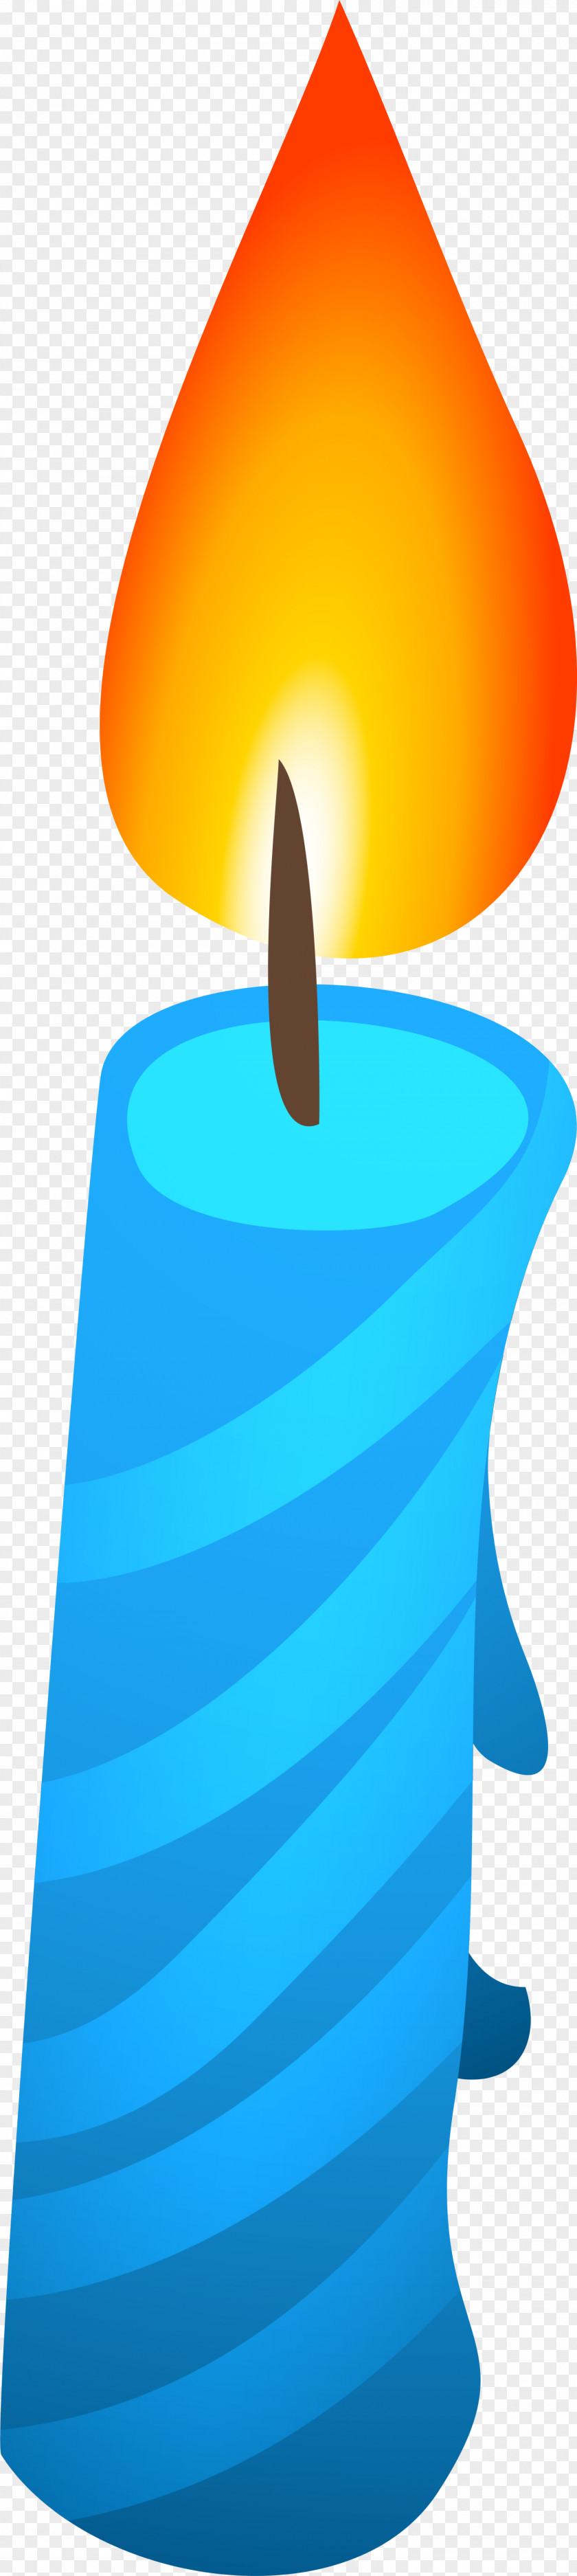 Blue Simple Candle Candlestick Clip Art PNG